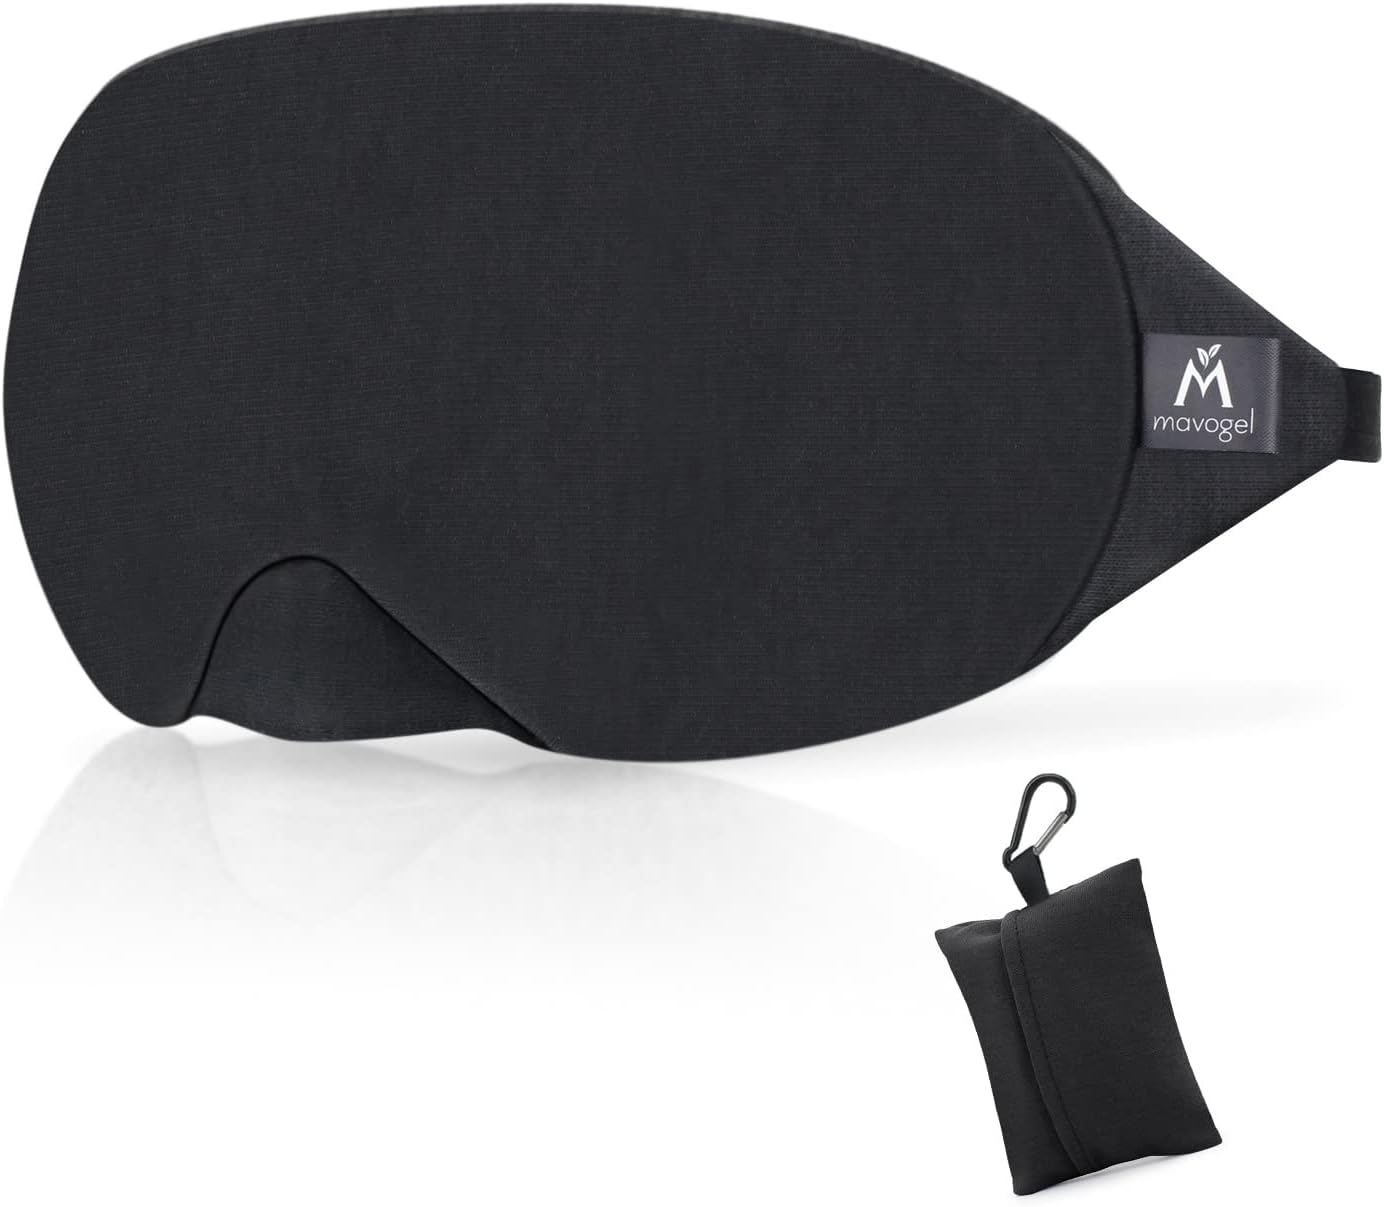 Mavogel Cotton Sleep Eye Mask Black with Travel Pouch RRP 5.58 CLEARANCE XL 3.99